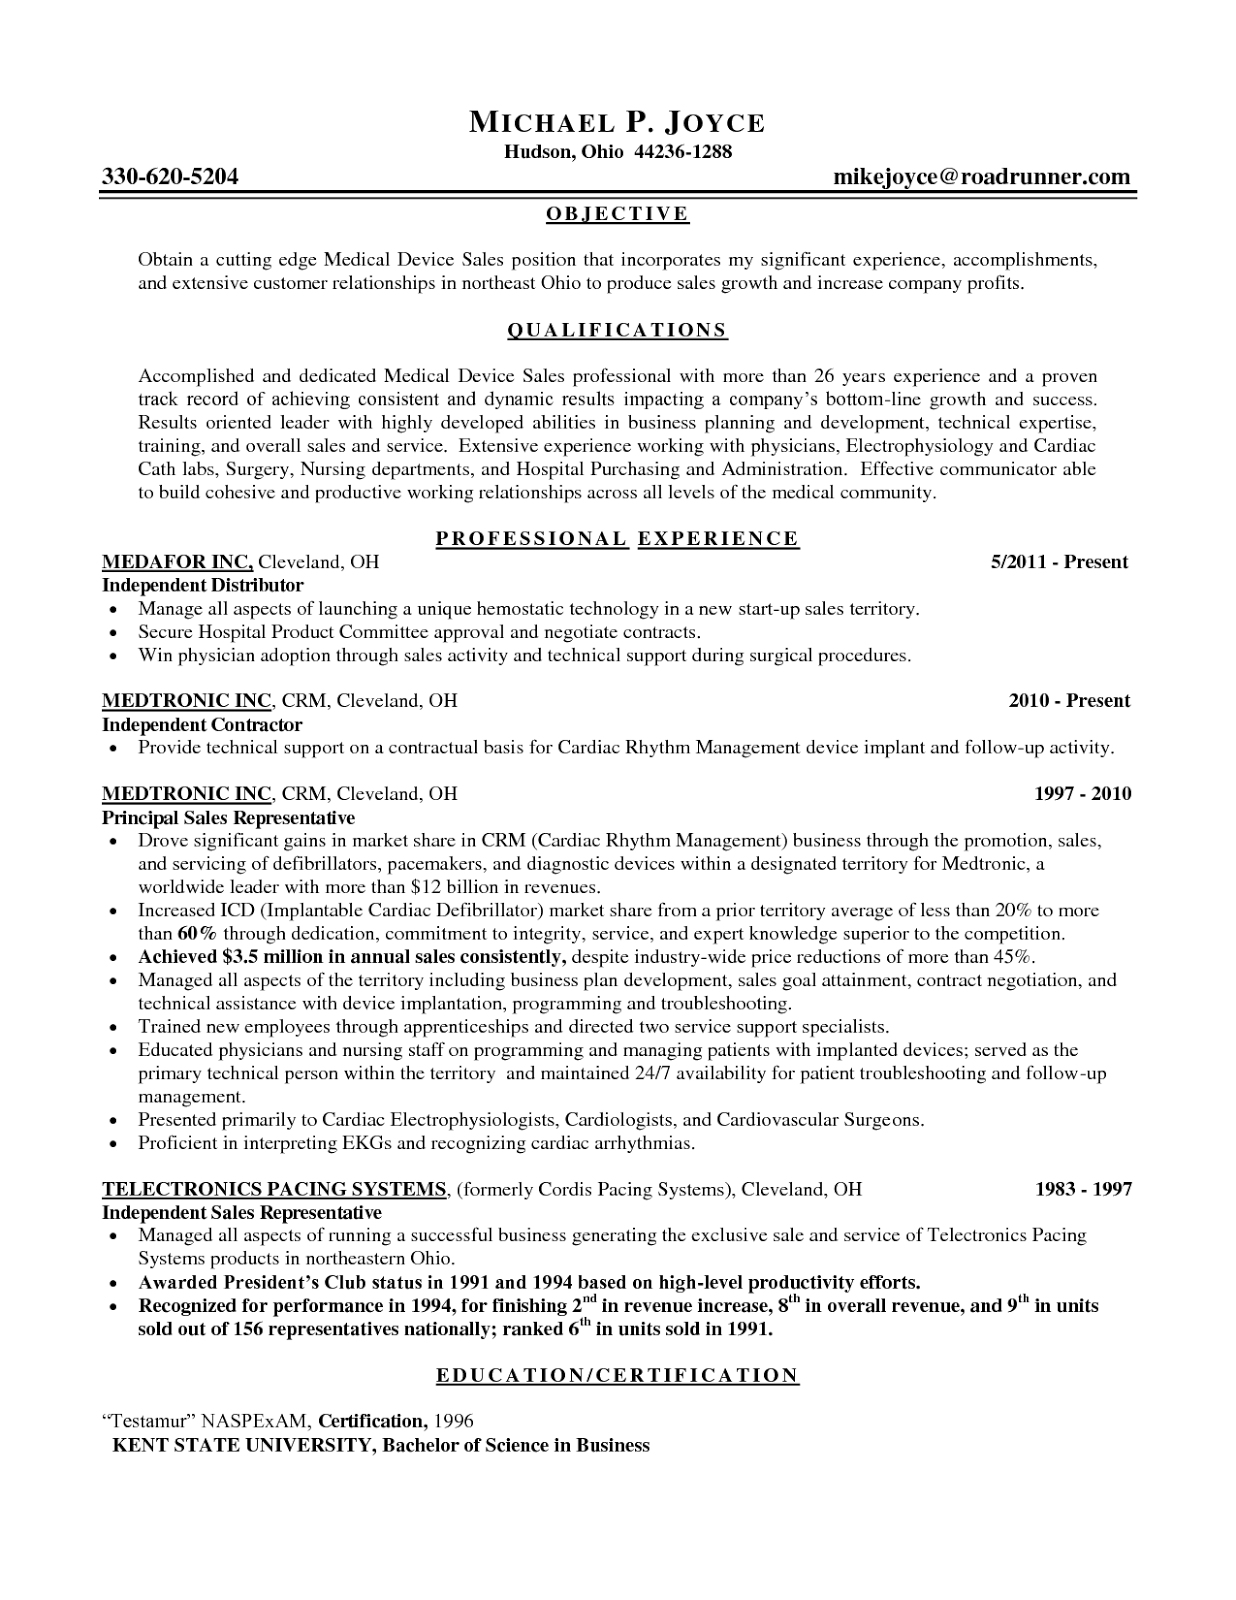 Examples Of Objectives For Resumes Pharmaceutical Salesve Objective Resume Rep Medical Field examples of objectives for resumes|wikiresume.com